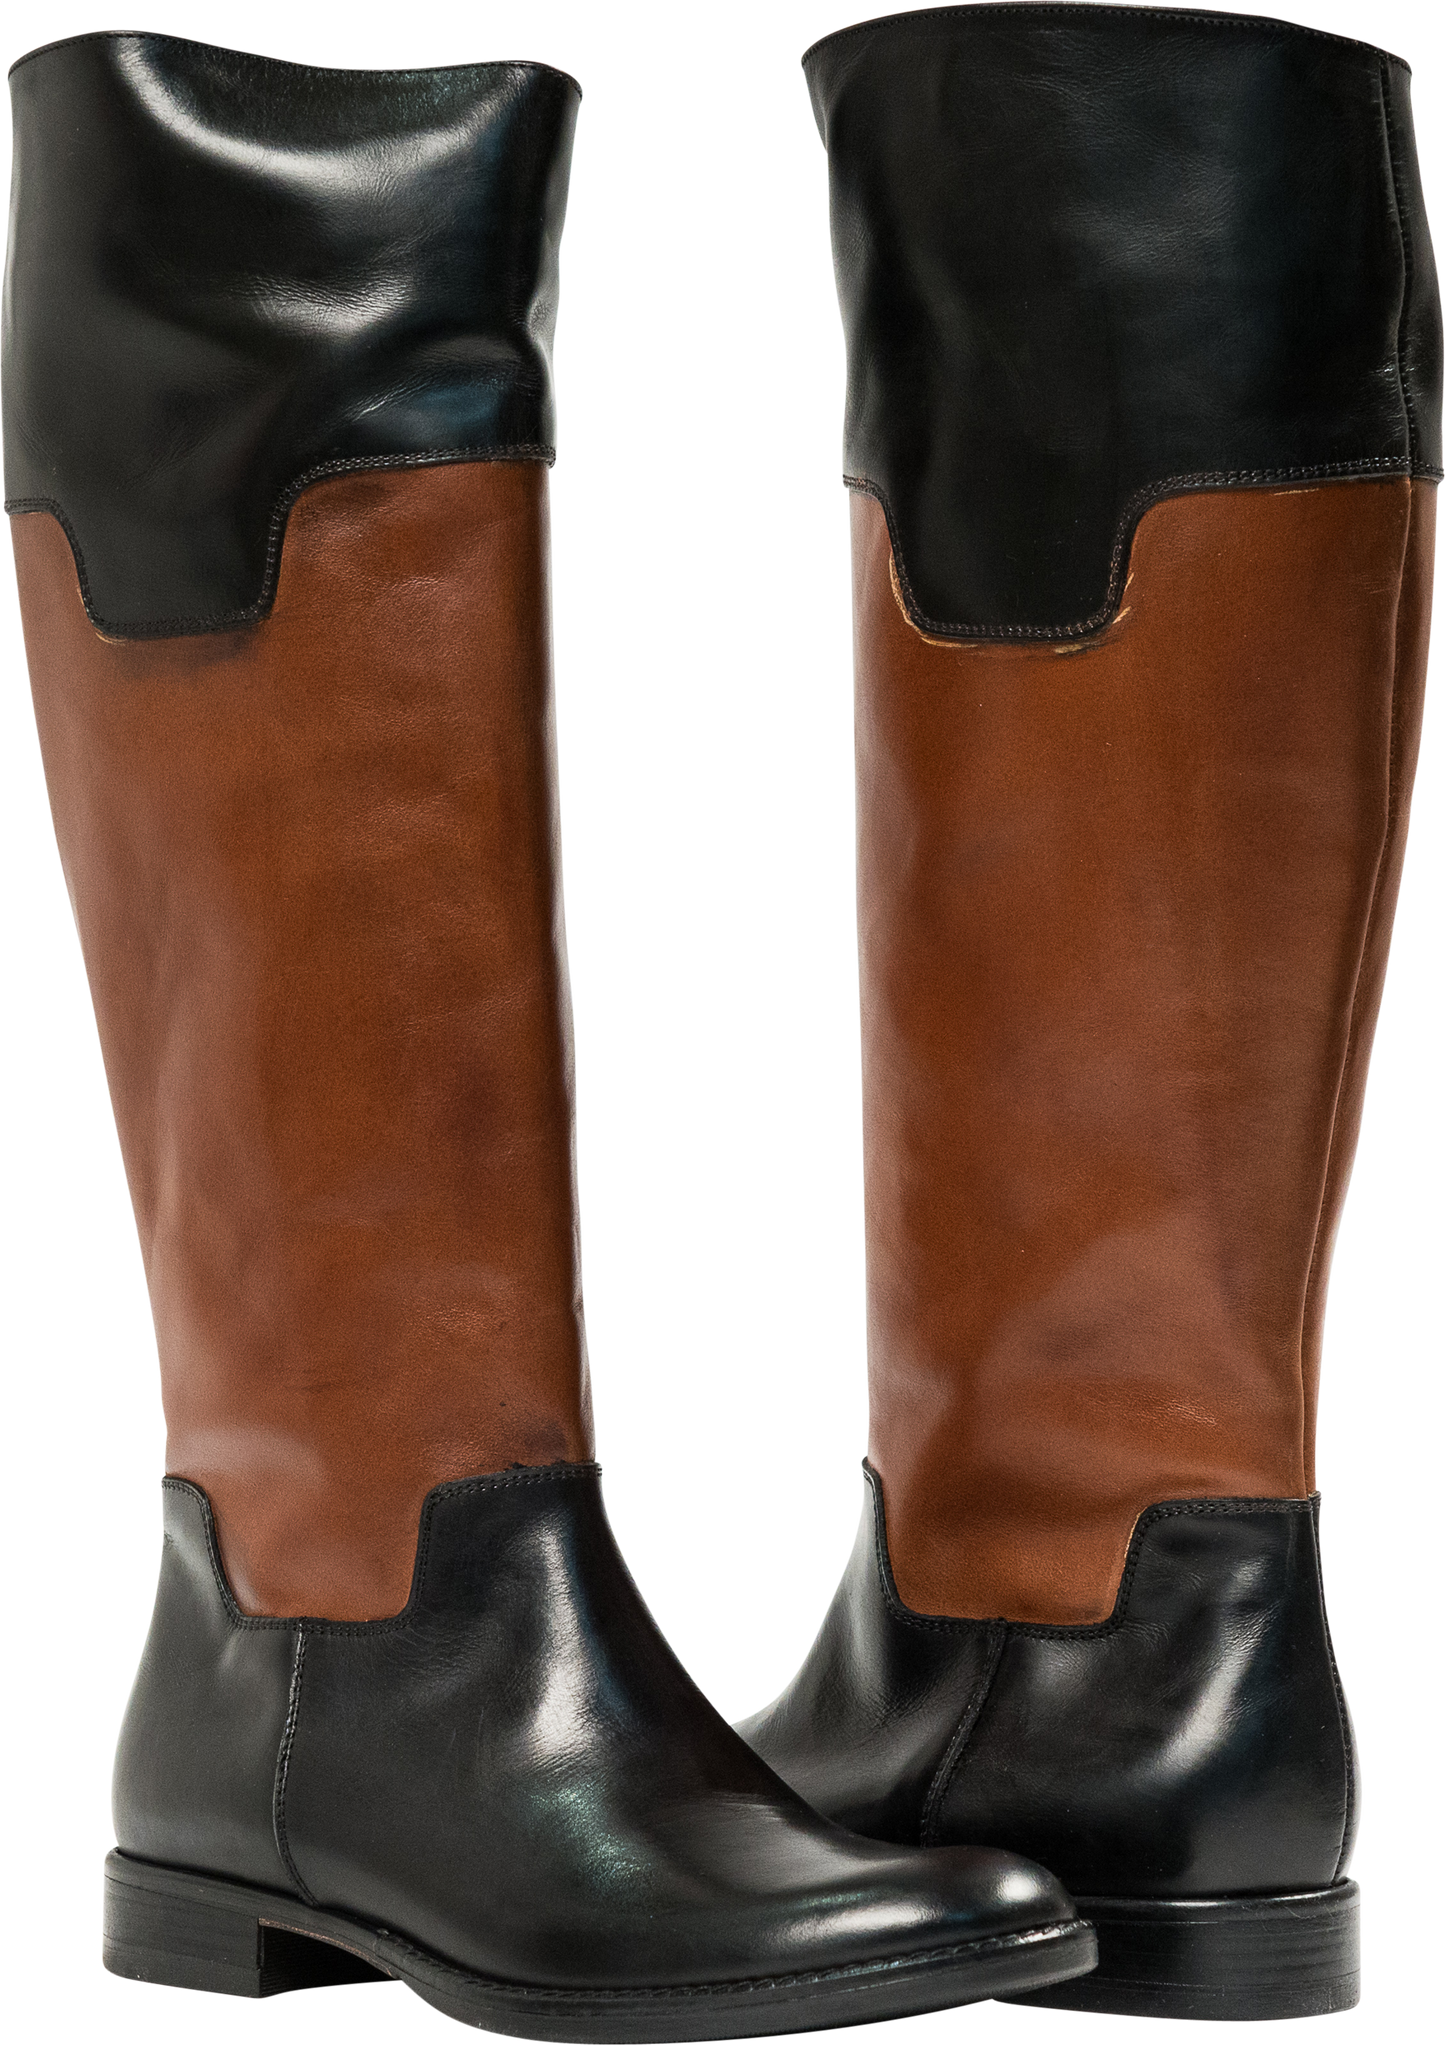 Lori Black and Brown Nappa Leather Tall Riding Boots